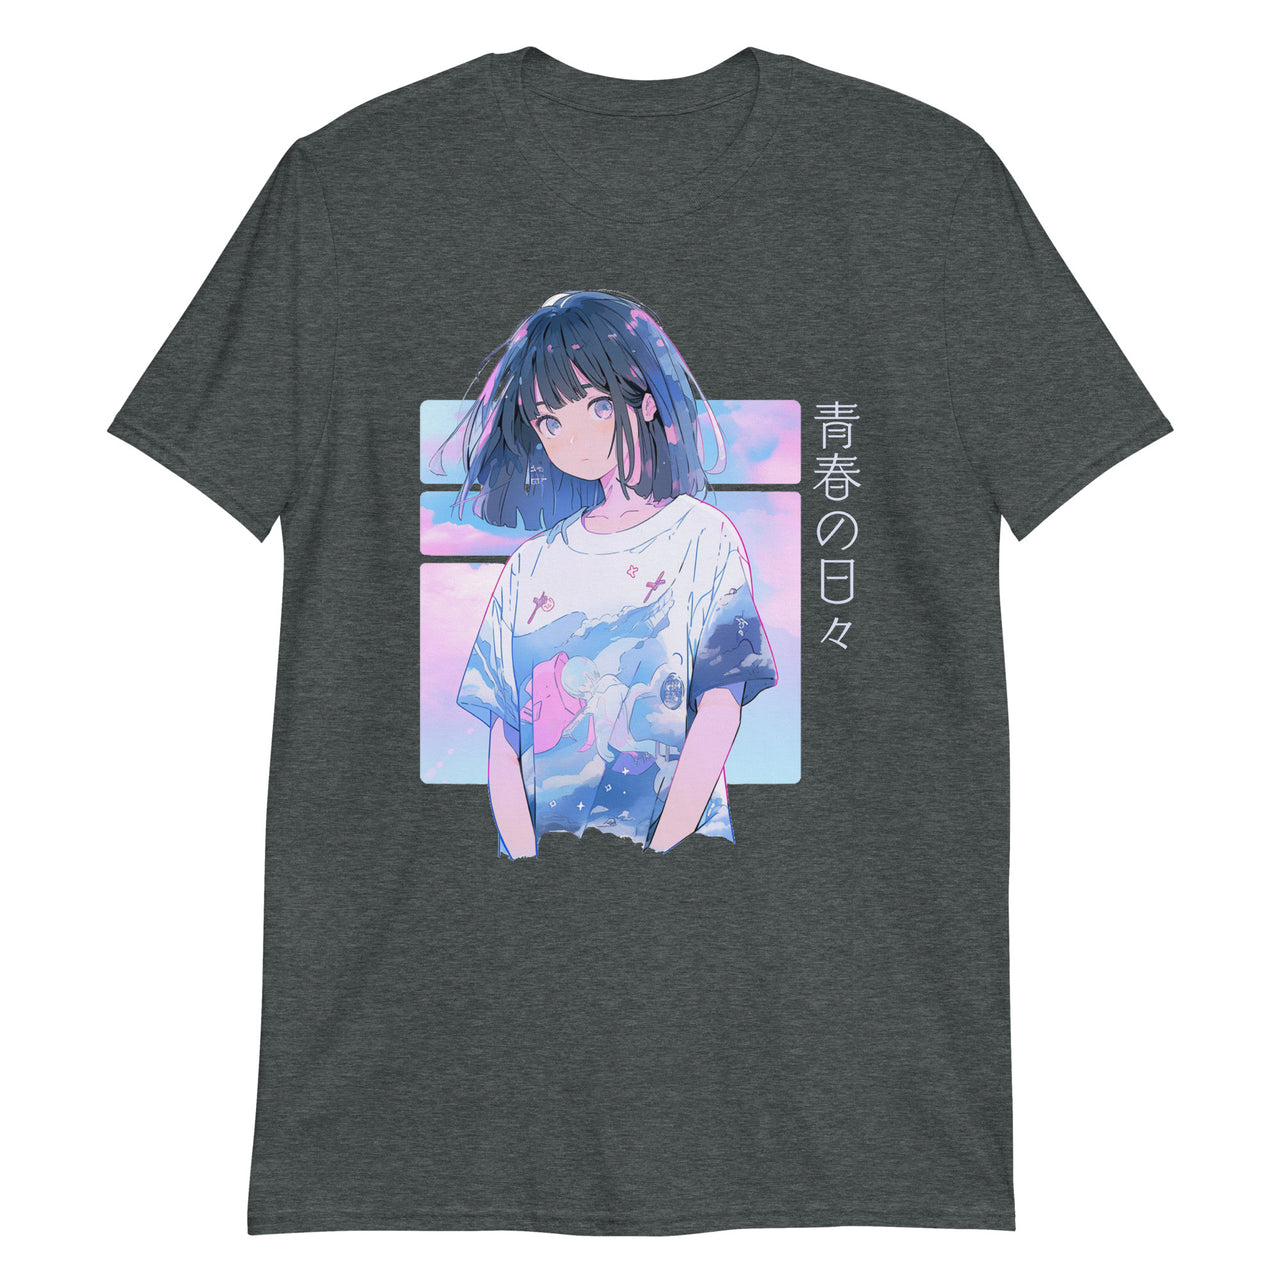 Youthful Days in Pastel Anime T-Shirt